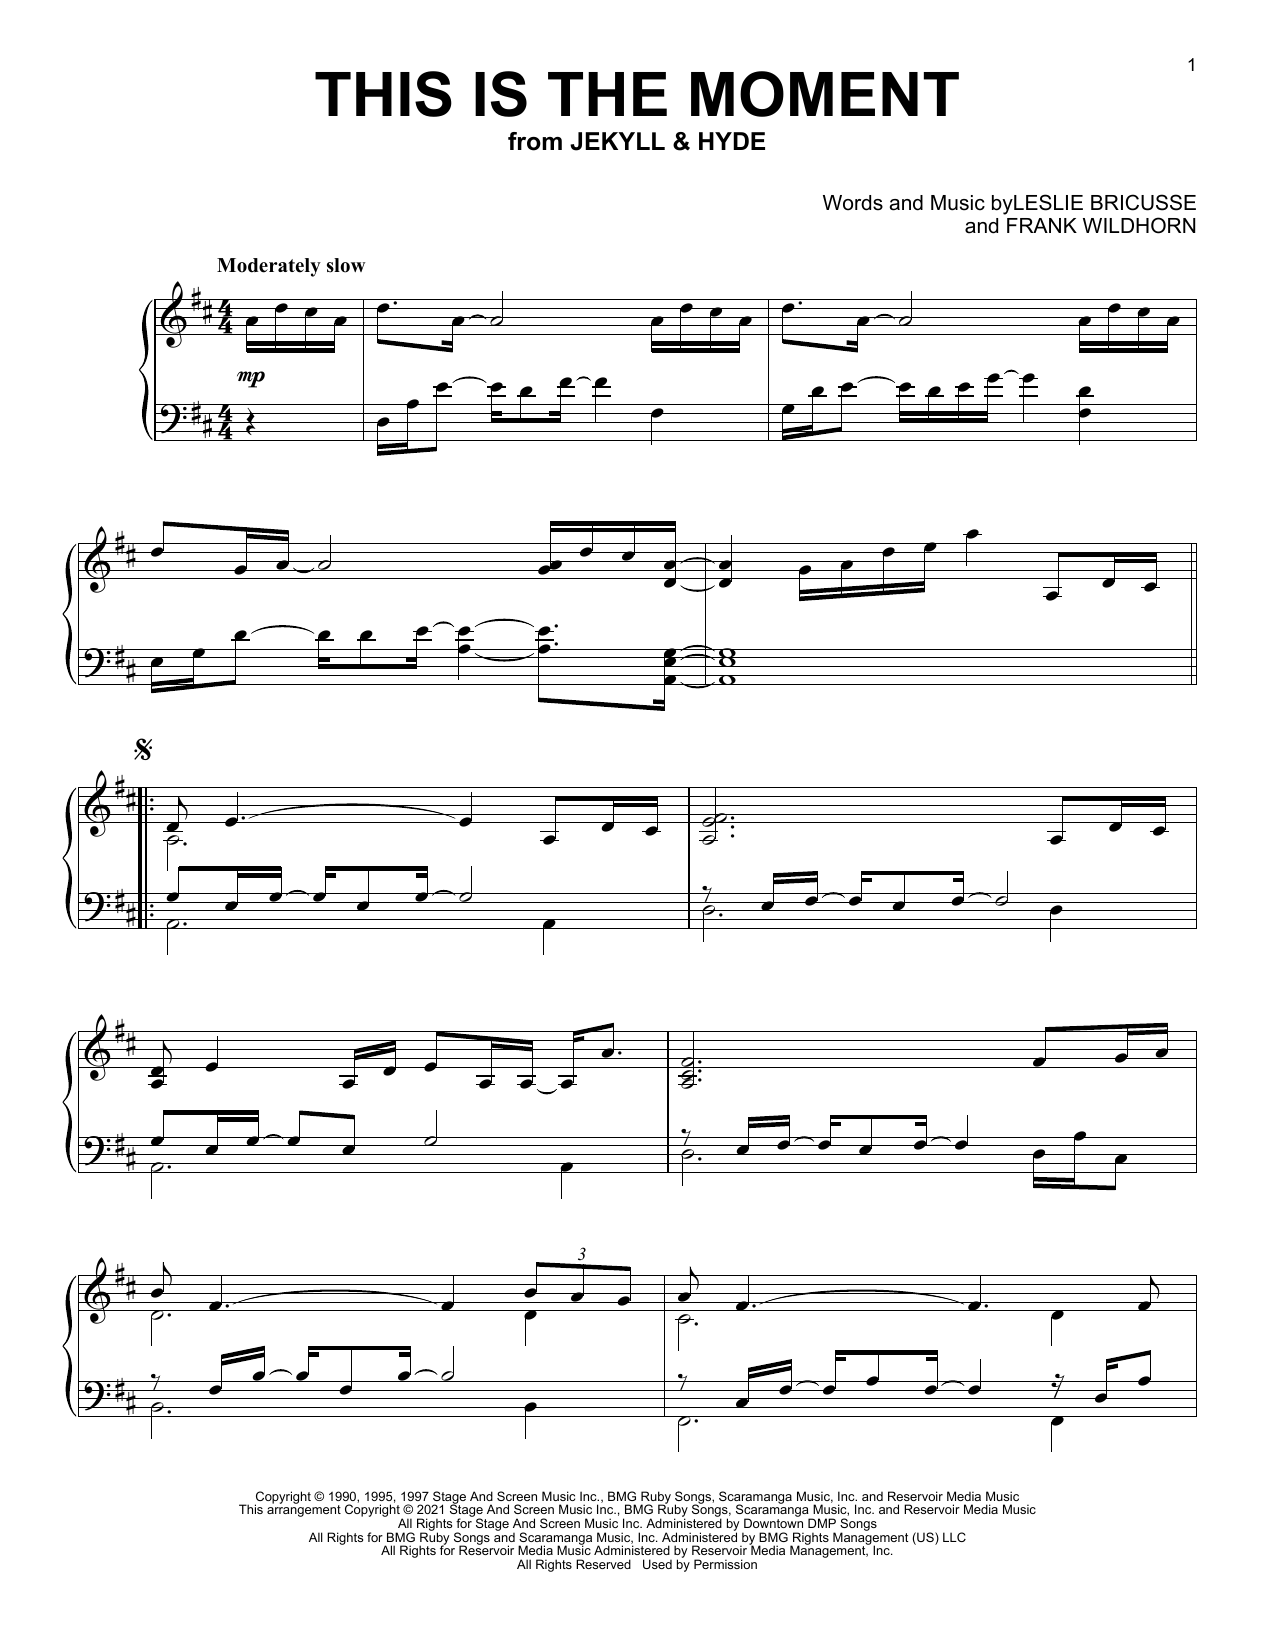 Download Leslie Bricusse This Is The Moment (from Jekyll & Hyde) Sheet Music